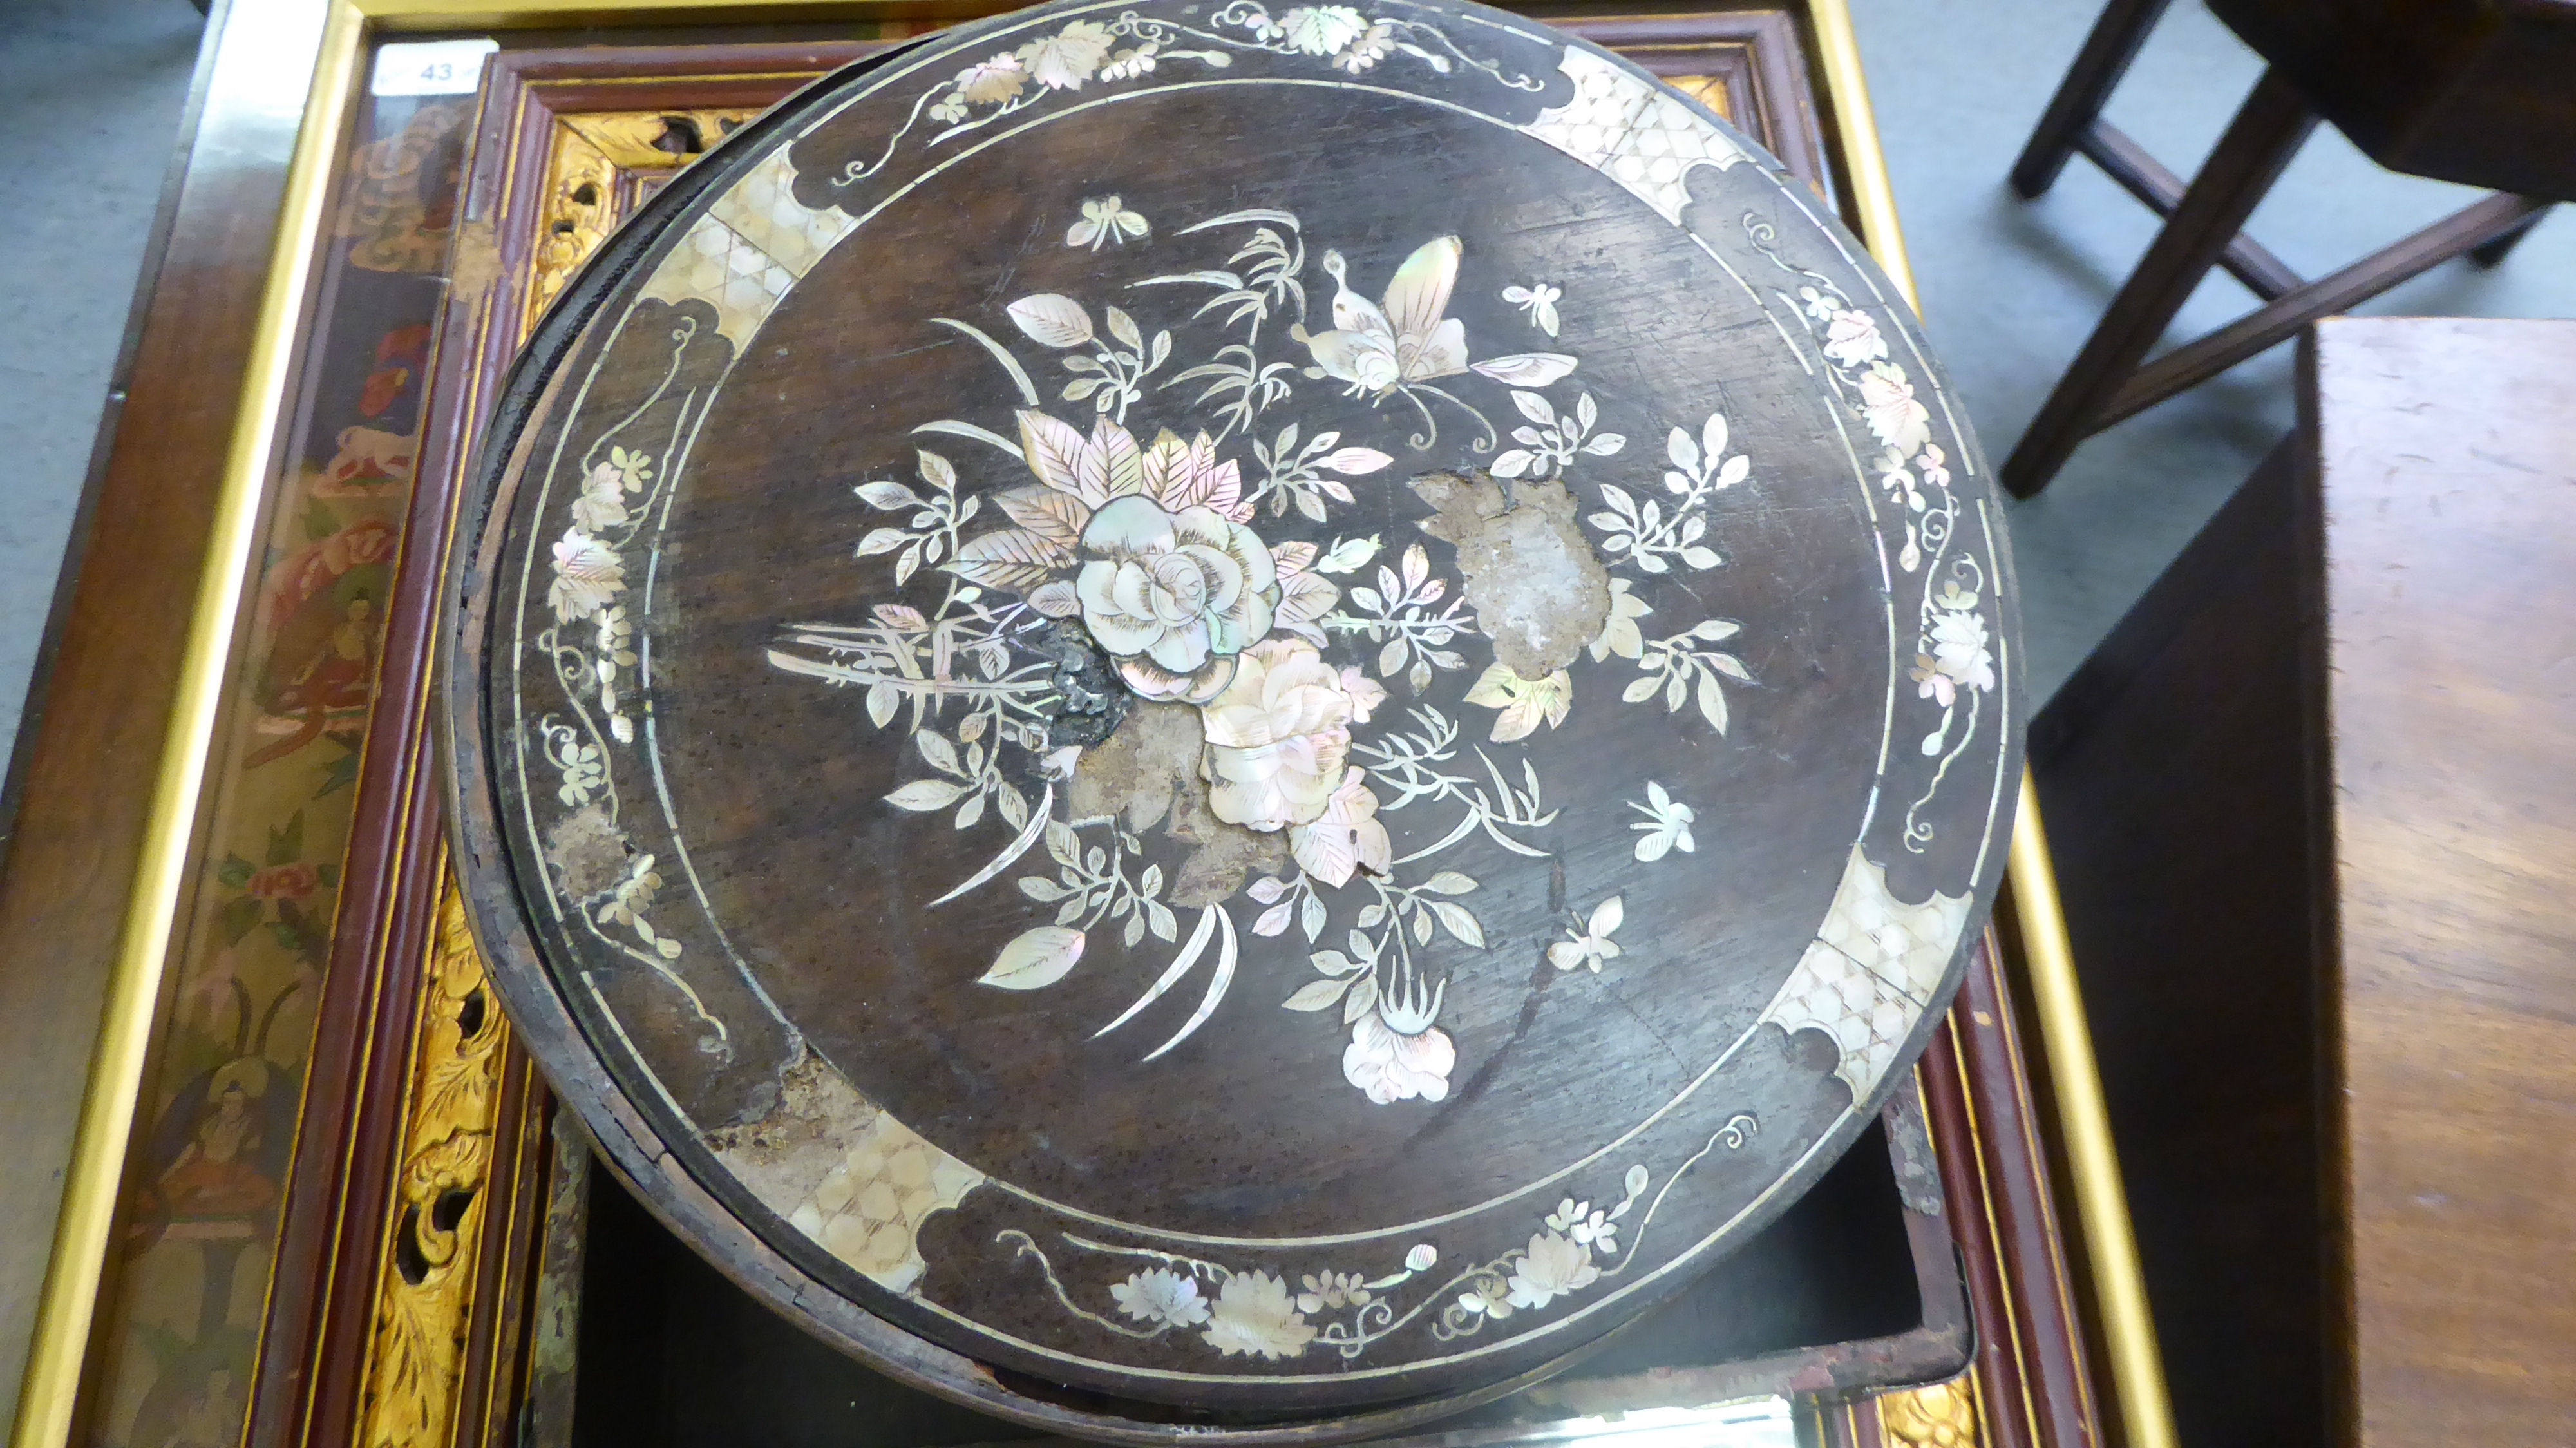 20thC Asian collectables: to include prints, a mirror  16" x 23" and mother-of-pearl inlaid items - Image 9 of 9